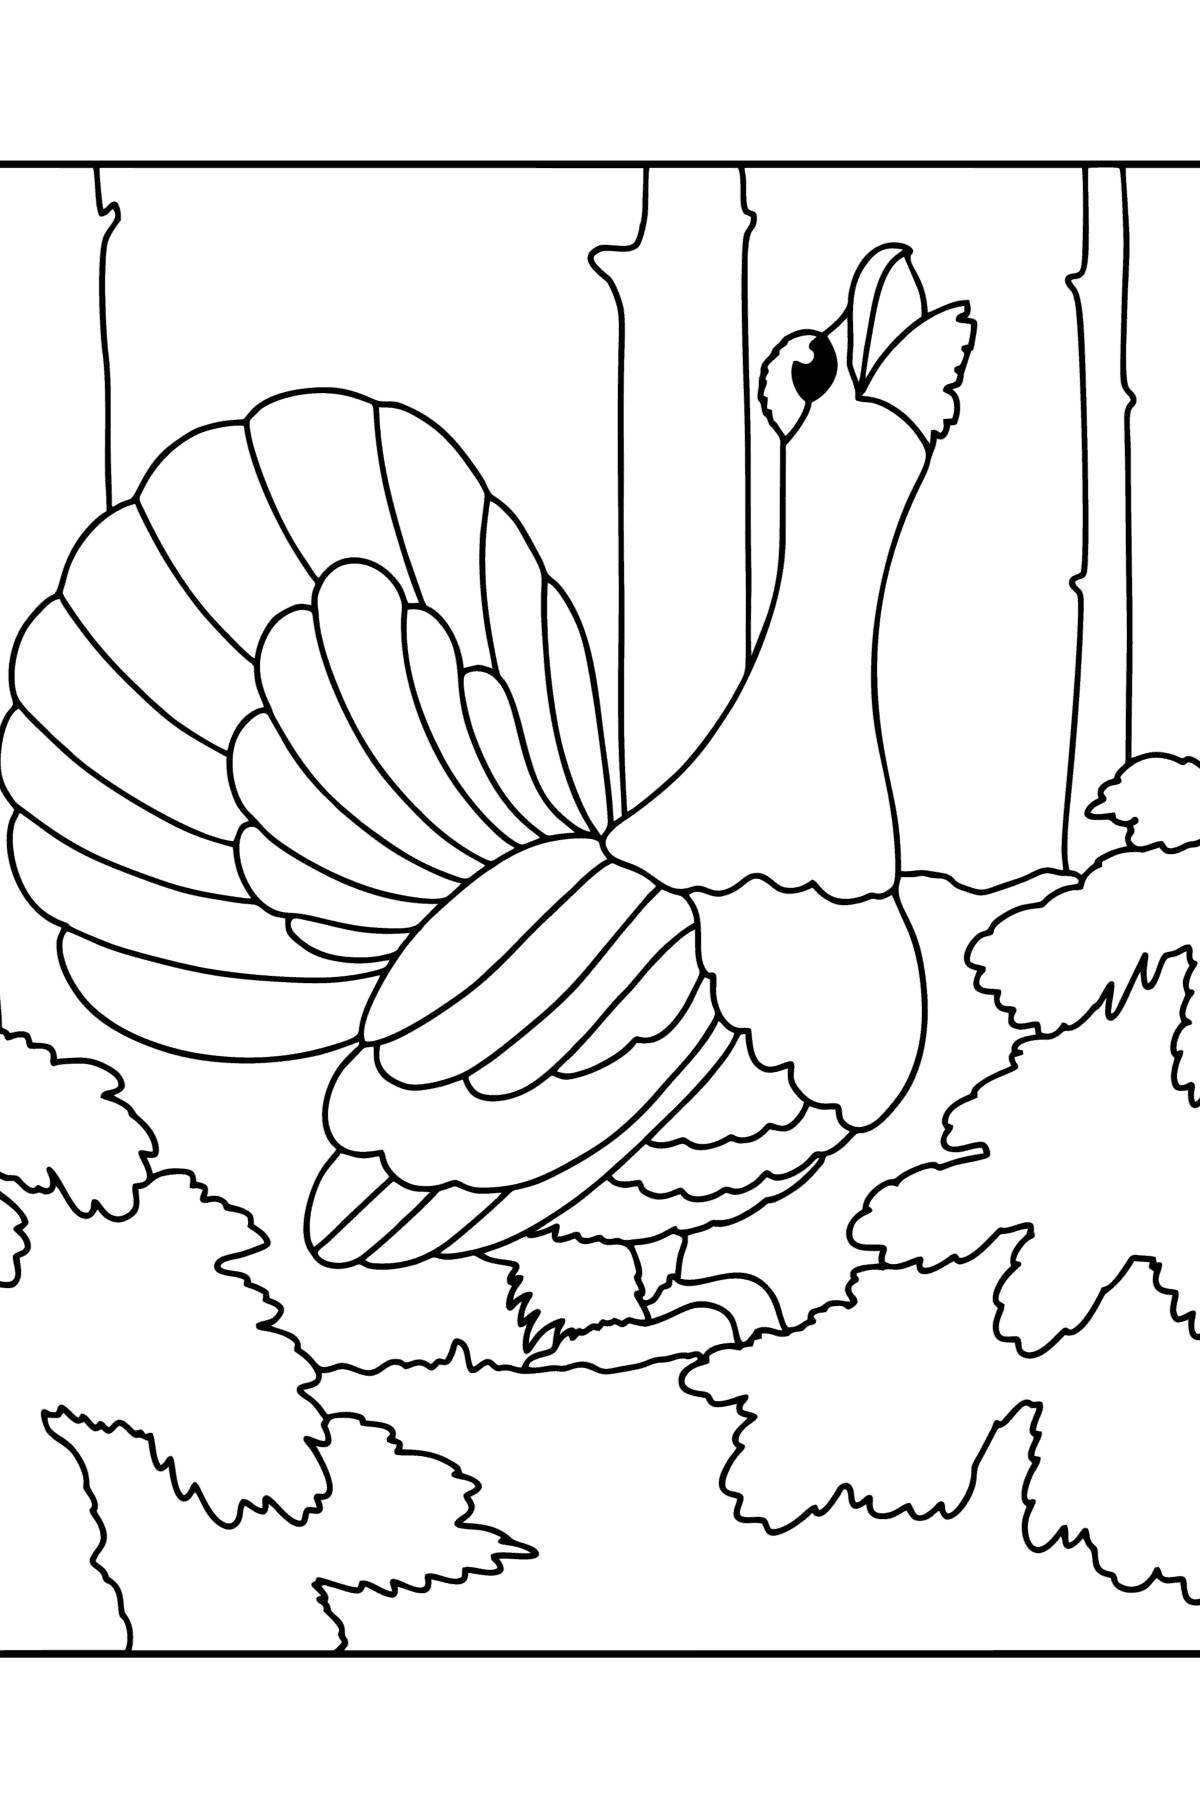 Coloring book shining capercaillie